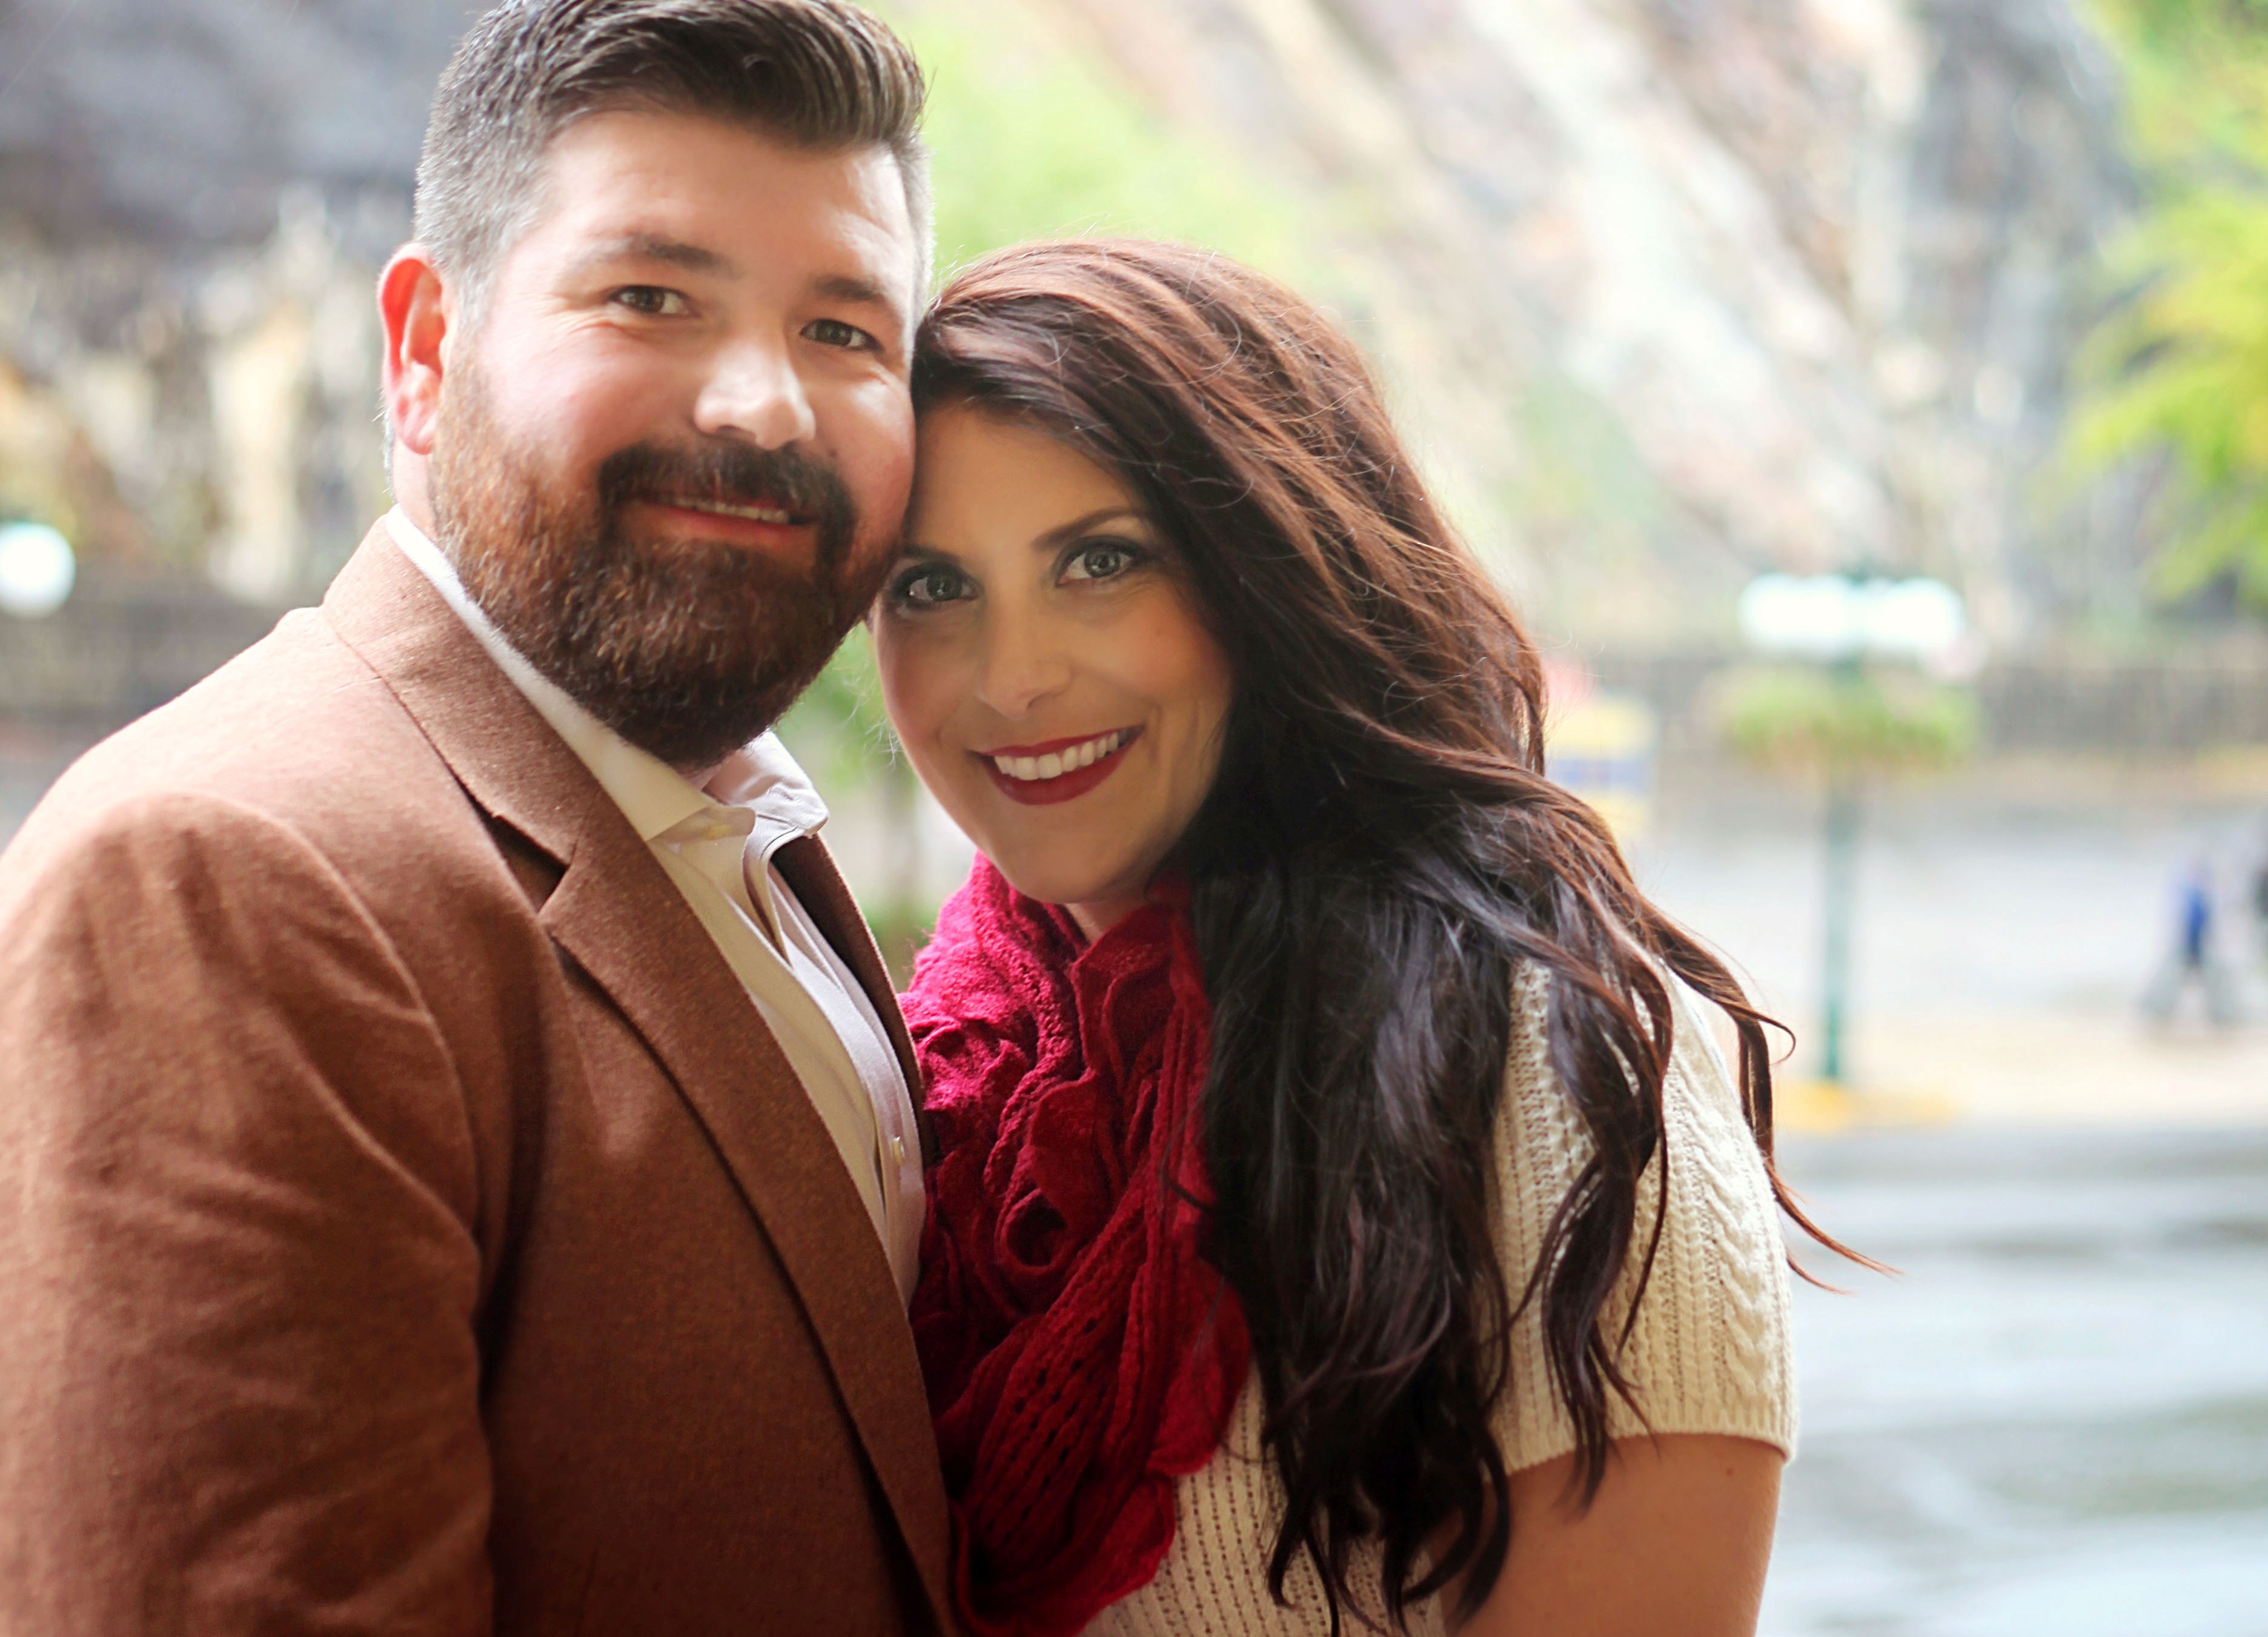 Local couples share stories of how they met